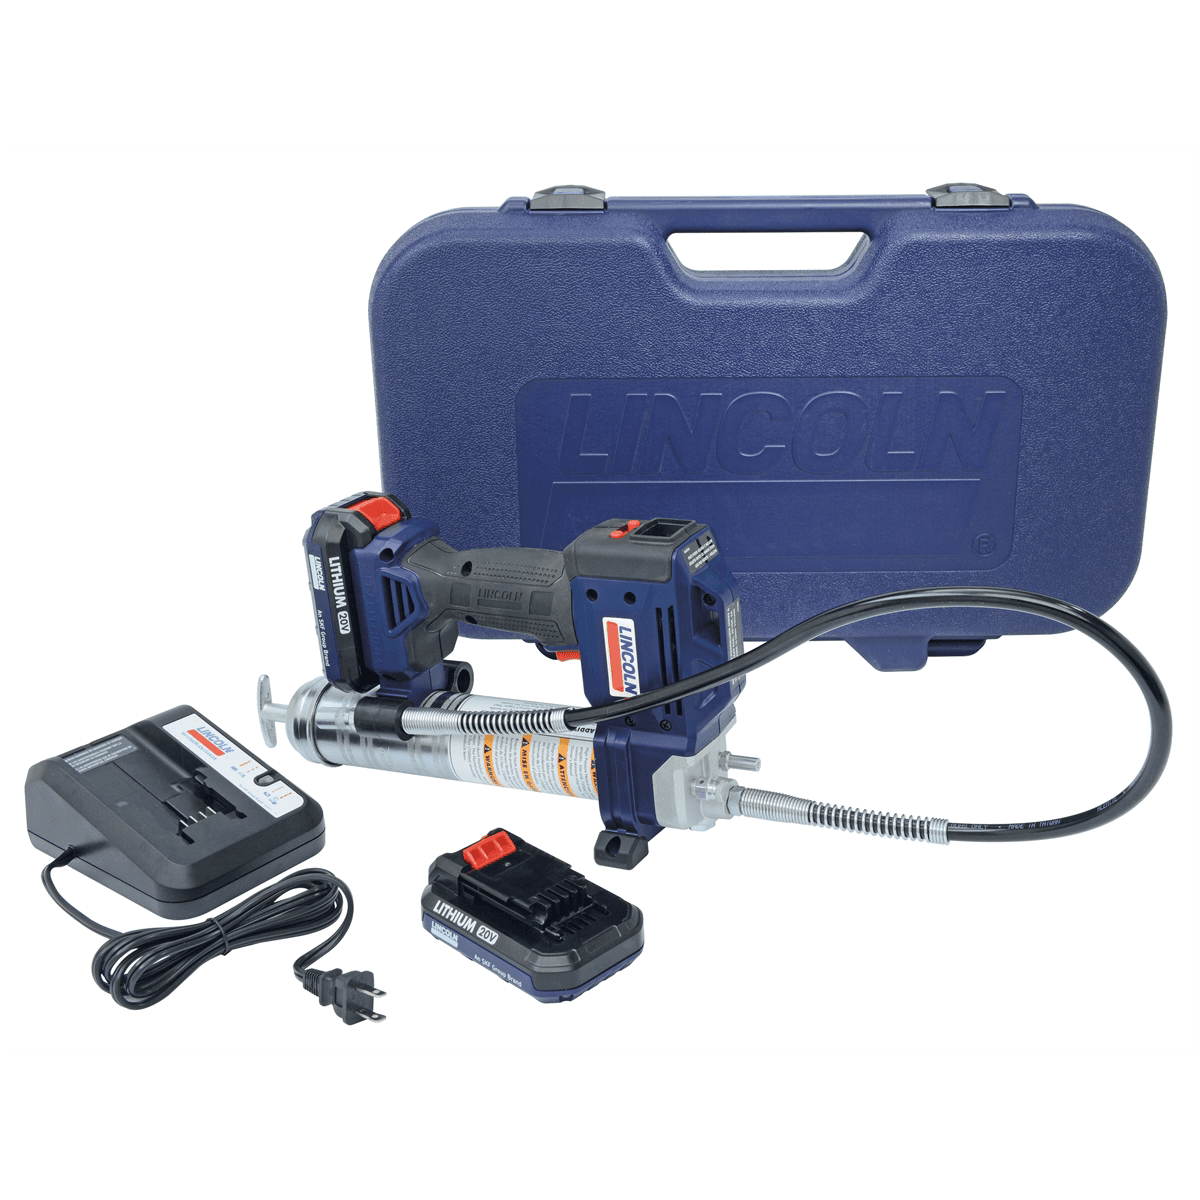 1884 Lithium-Ion PowerLuber 20-Volt Battery-Operated Cordless Grease Gun